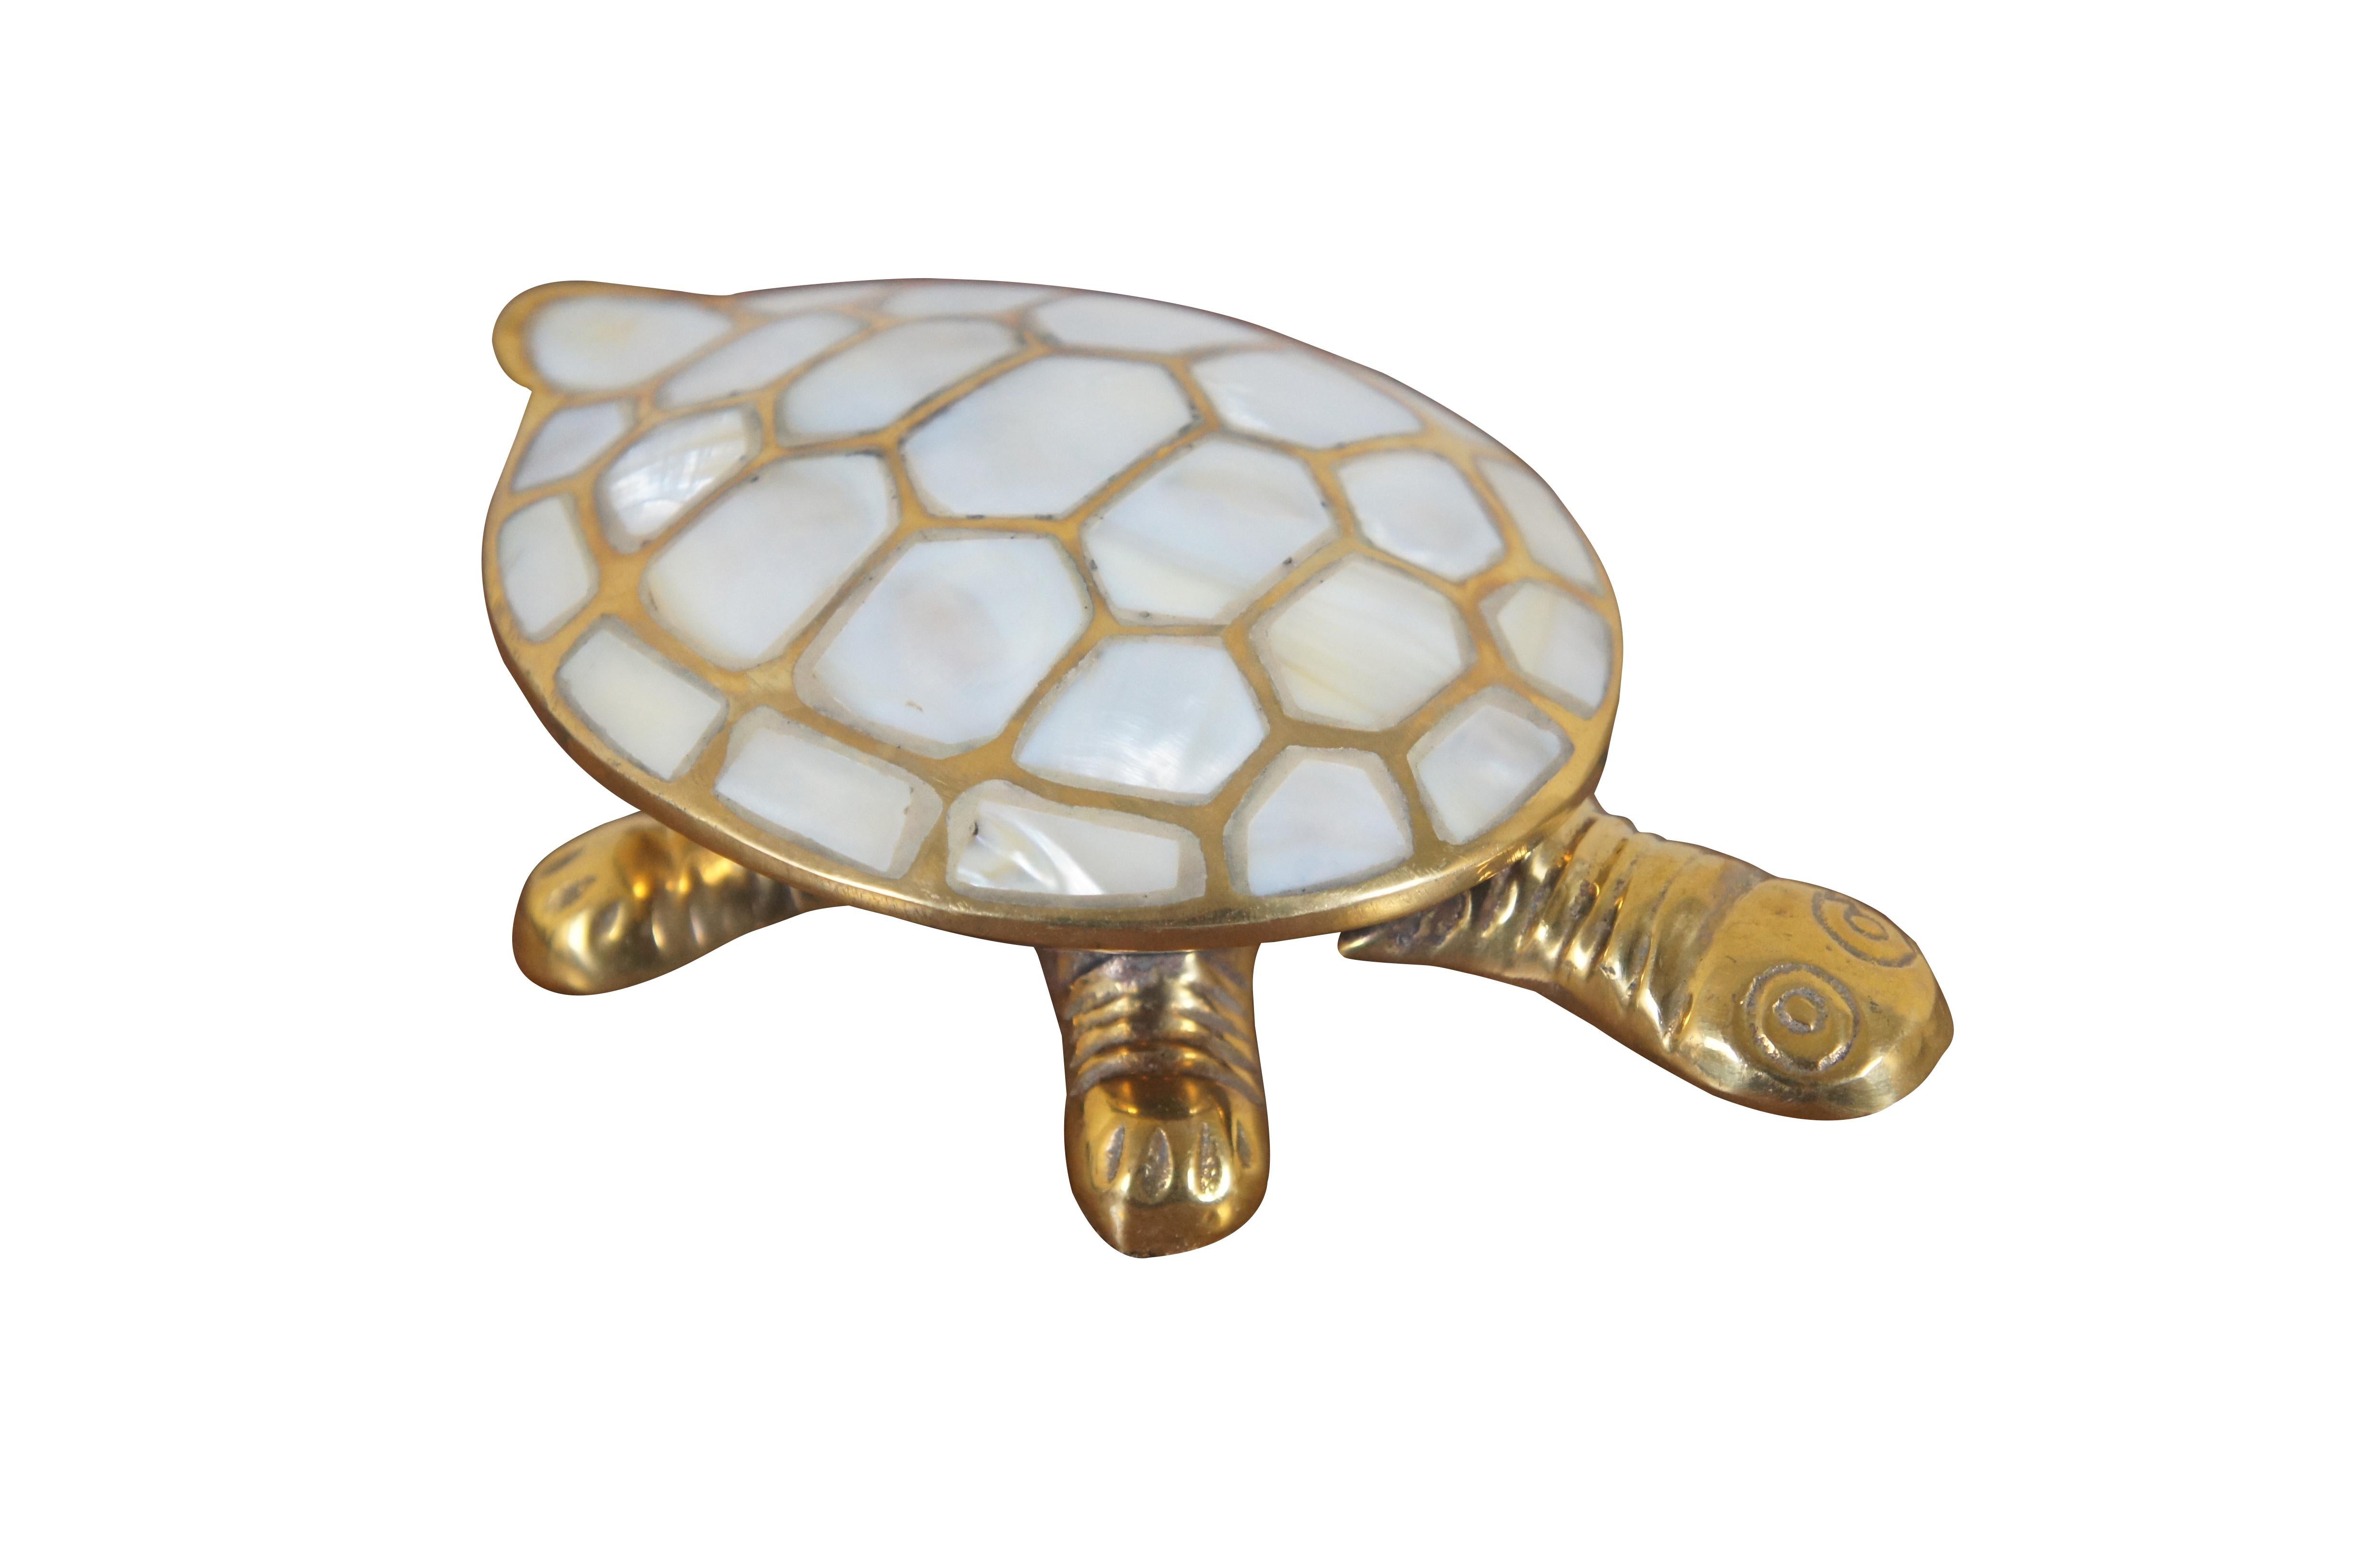 Vintage large brass trinket box in the shape of a turtle / tortoise with mother of pearl inlaid shell. Made in India.

Dimensions:
6.25